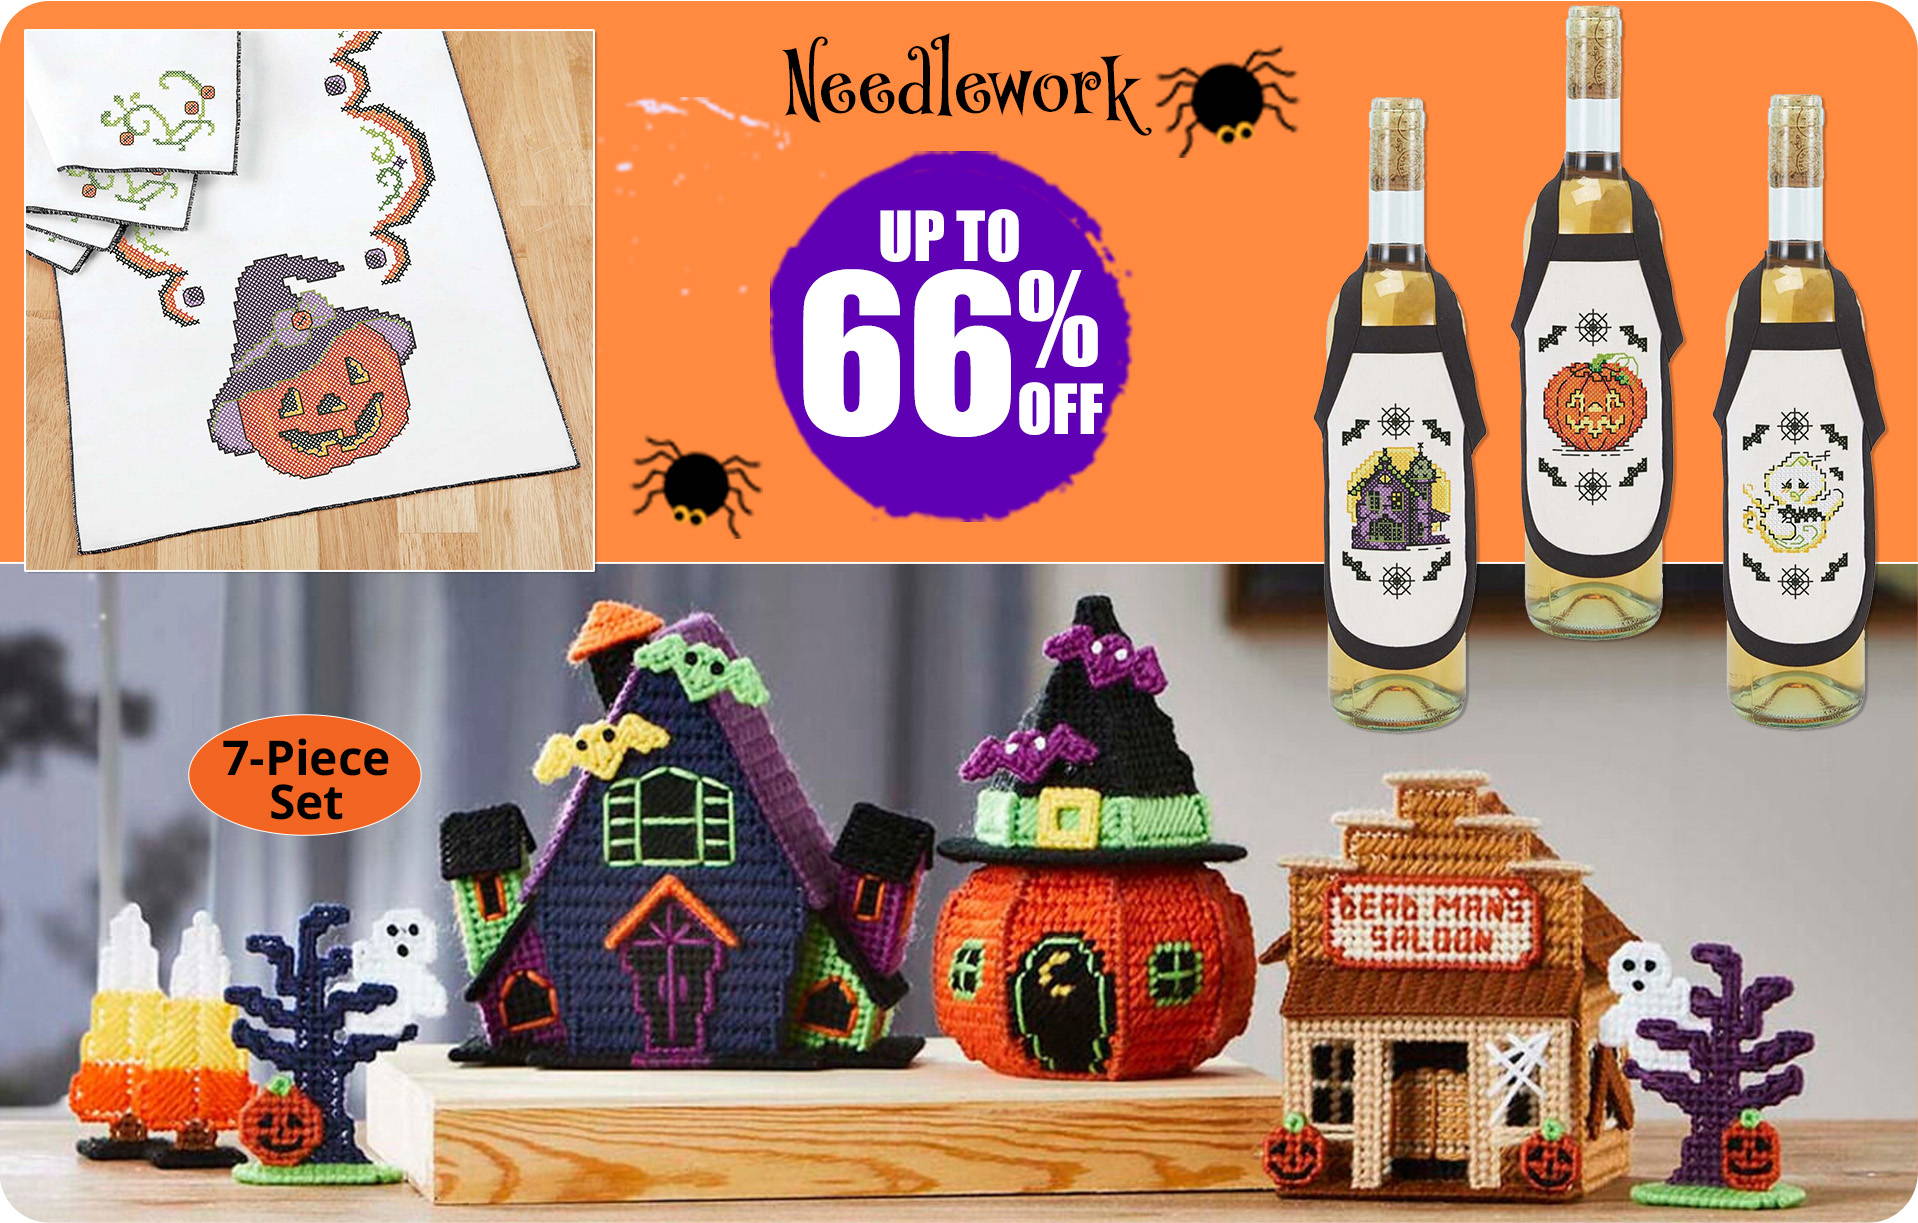 Needlework up to 50% off. Image: Halloween Village II Plastic Canvas kit and other featured projects.